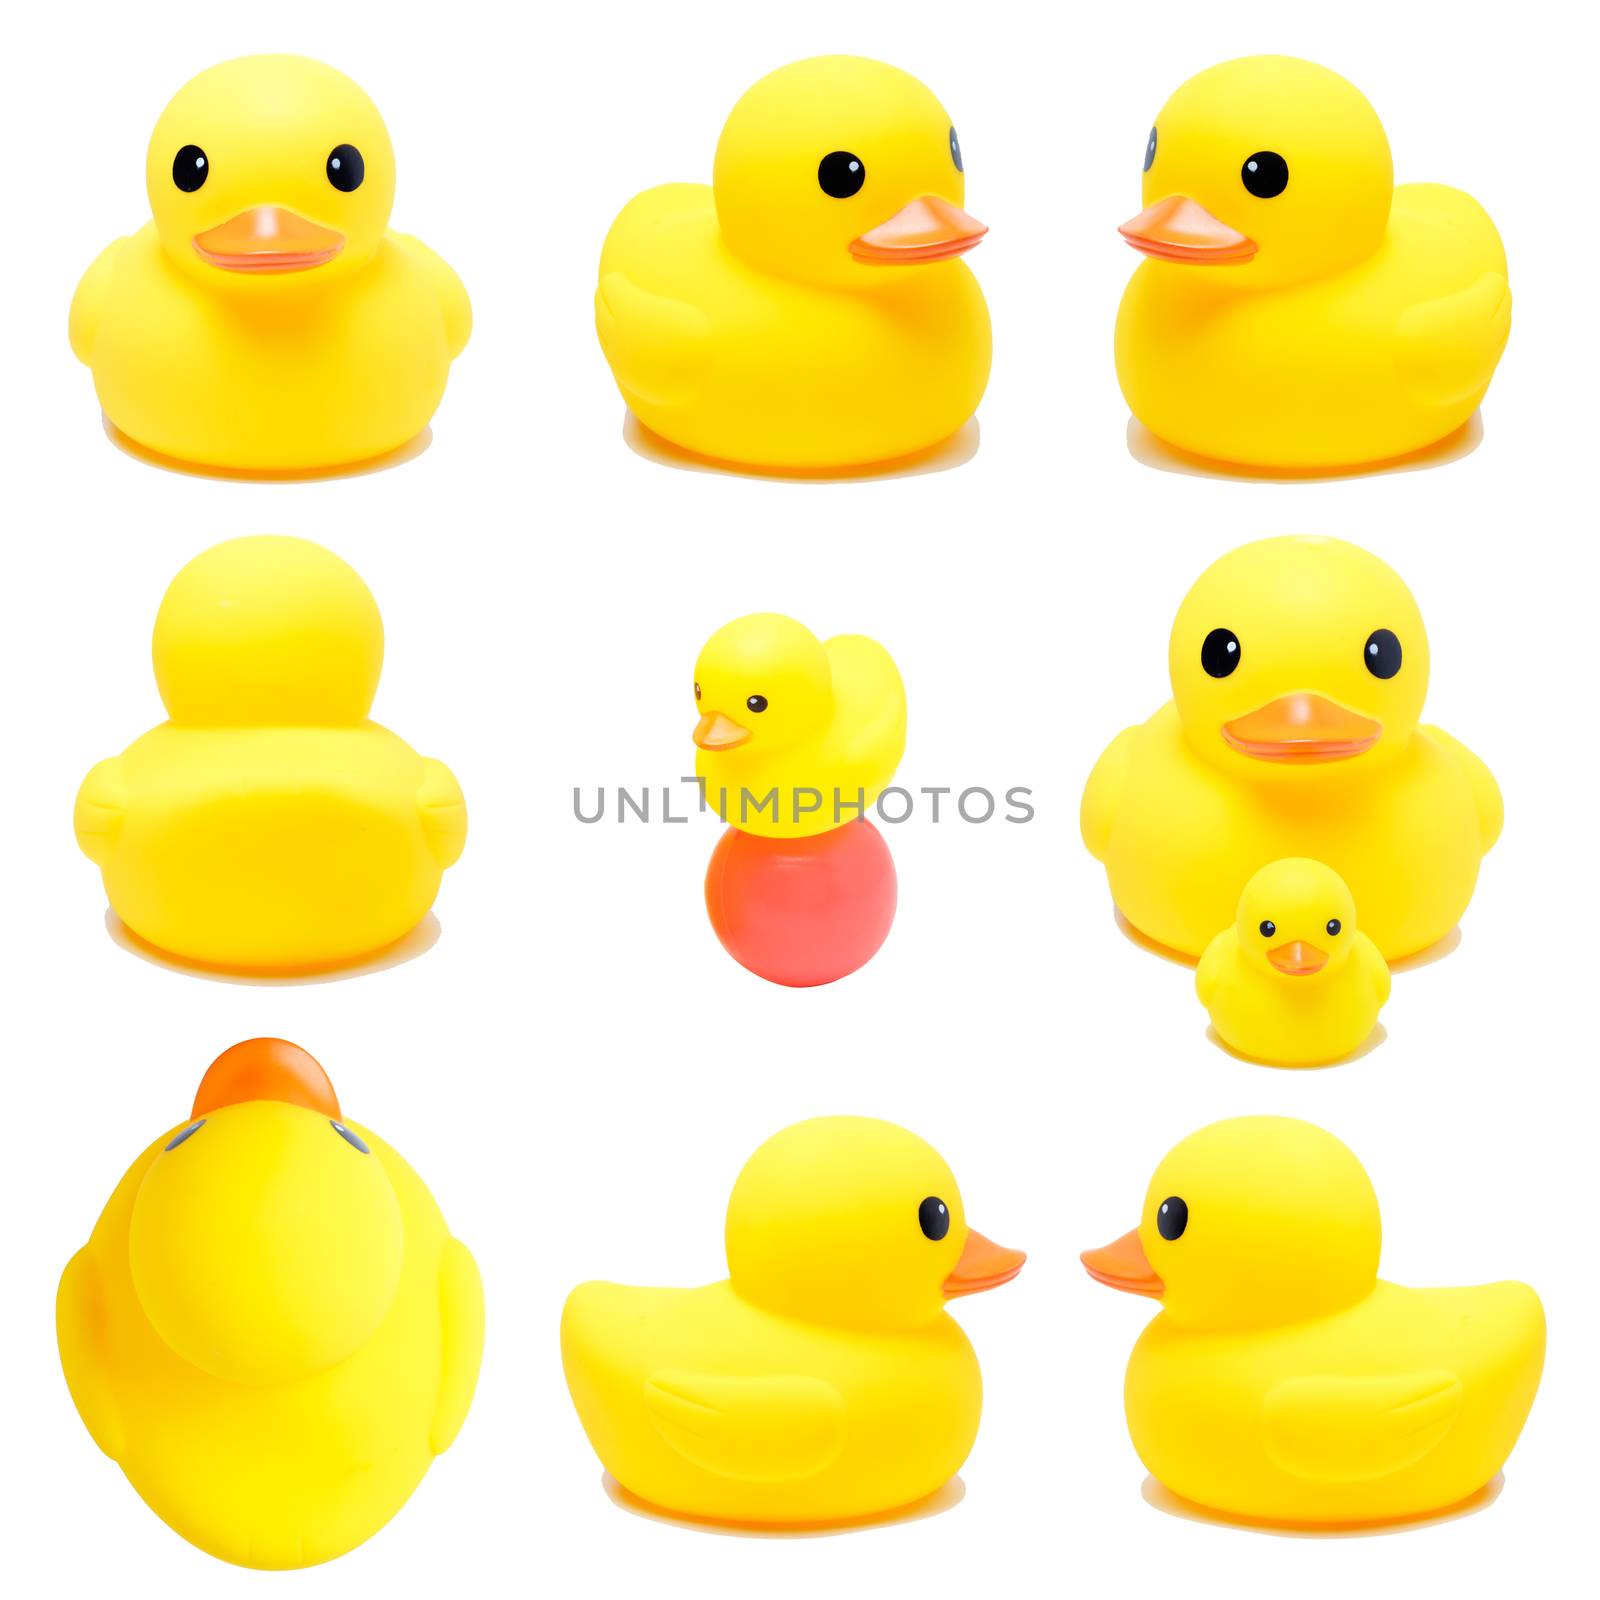 Collection of yellow rubber duck by zneb076